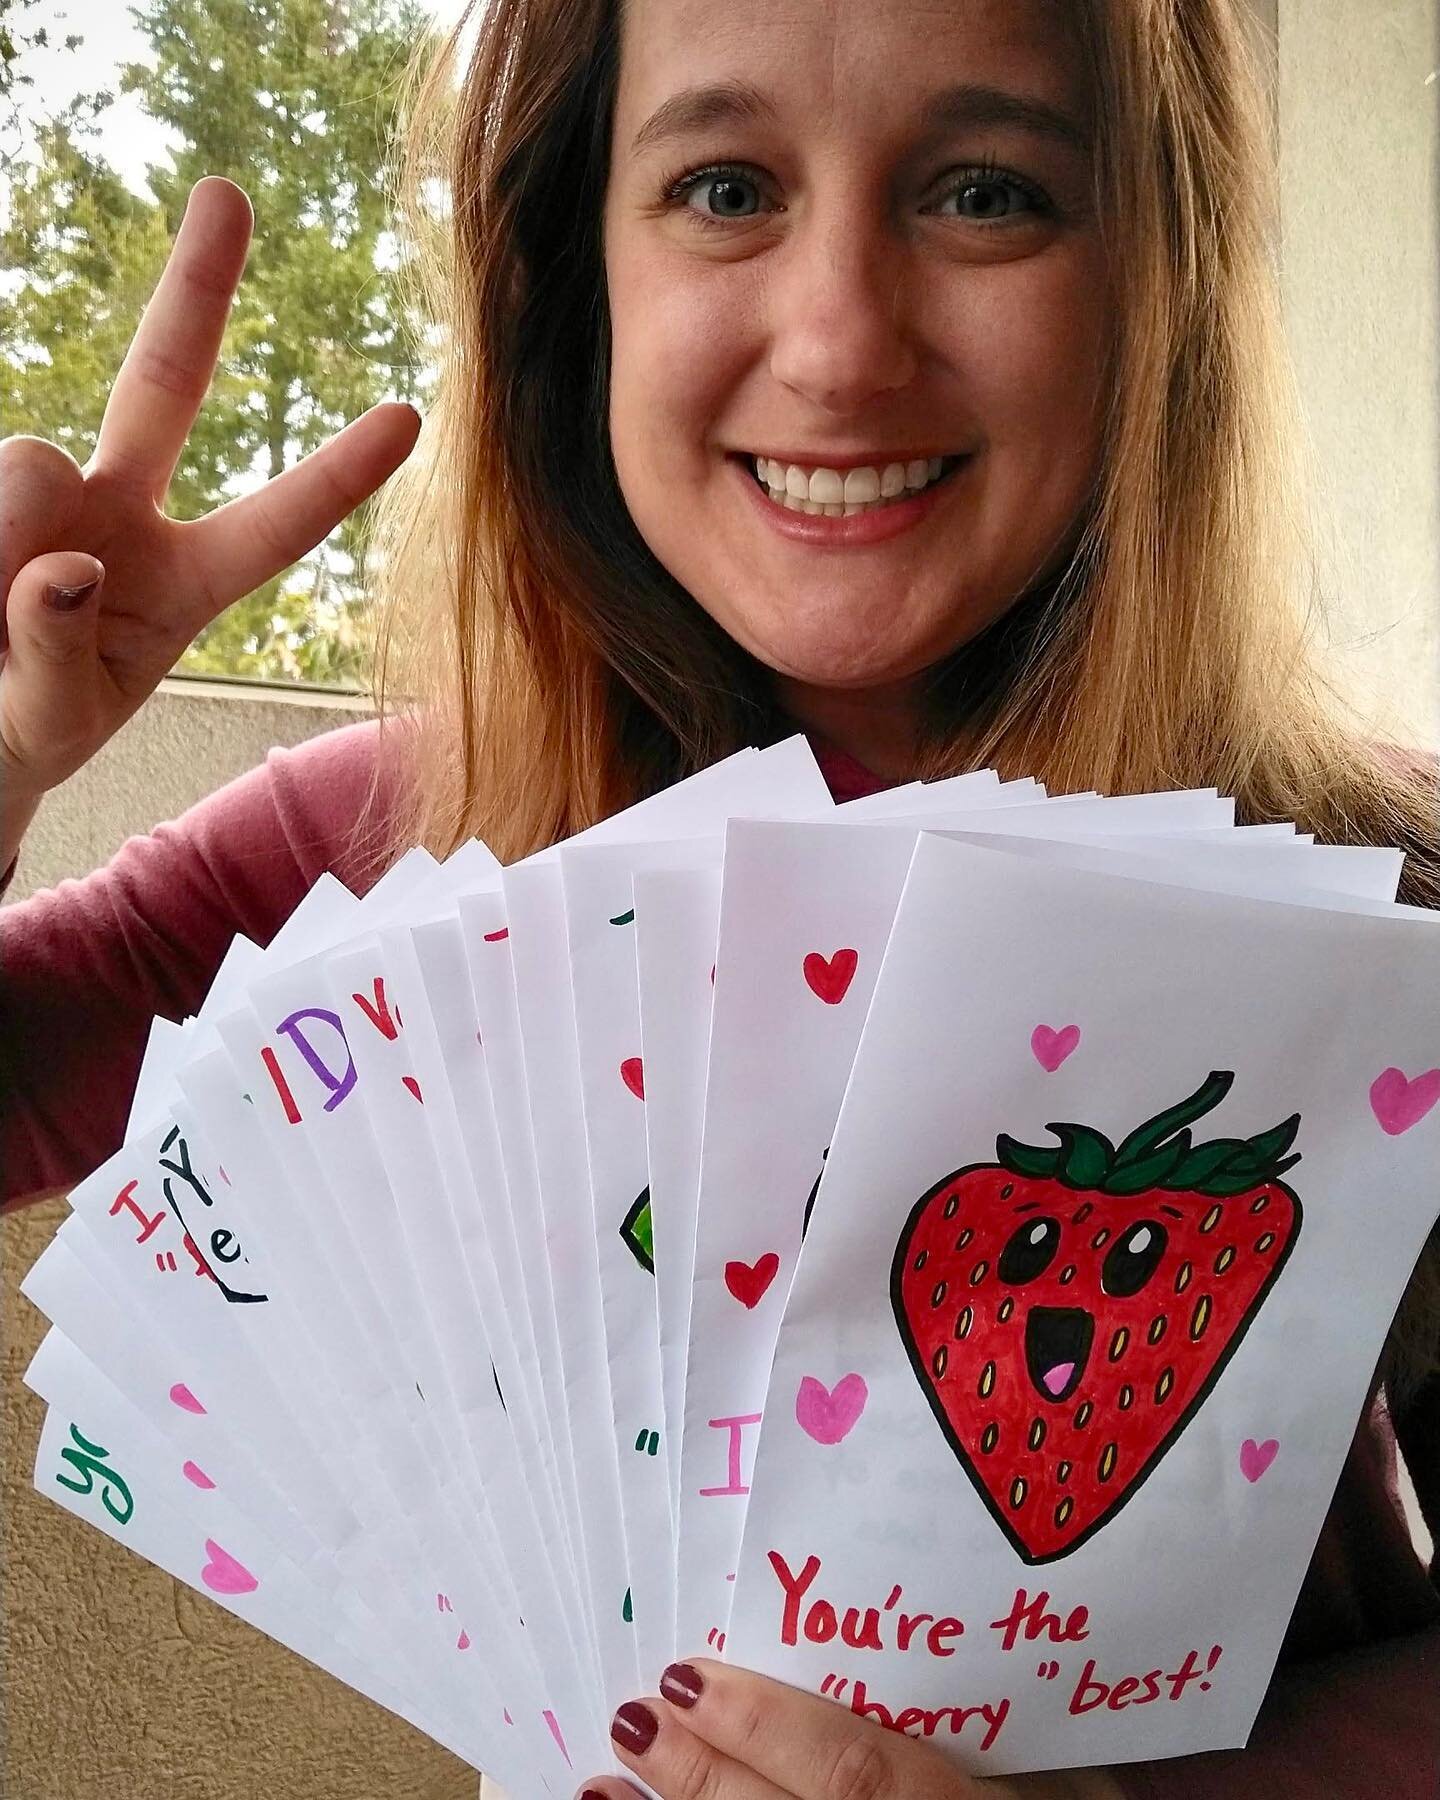 It's happening! It's happening ❤️ Volunteers are over the U.S. touching thousands with ❤️ through handmade Valentines Day cards to combat the effects of social isolation and loneliness. Delivery confirmations flooding in like this one from @3lingual_